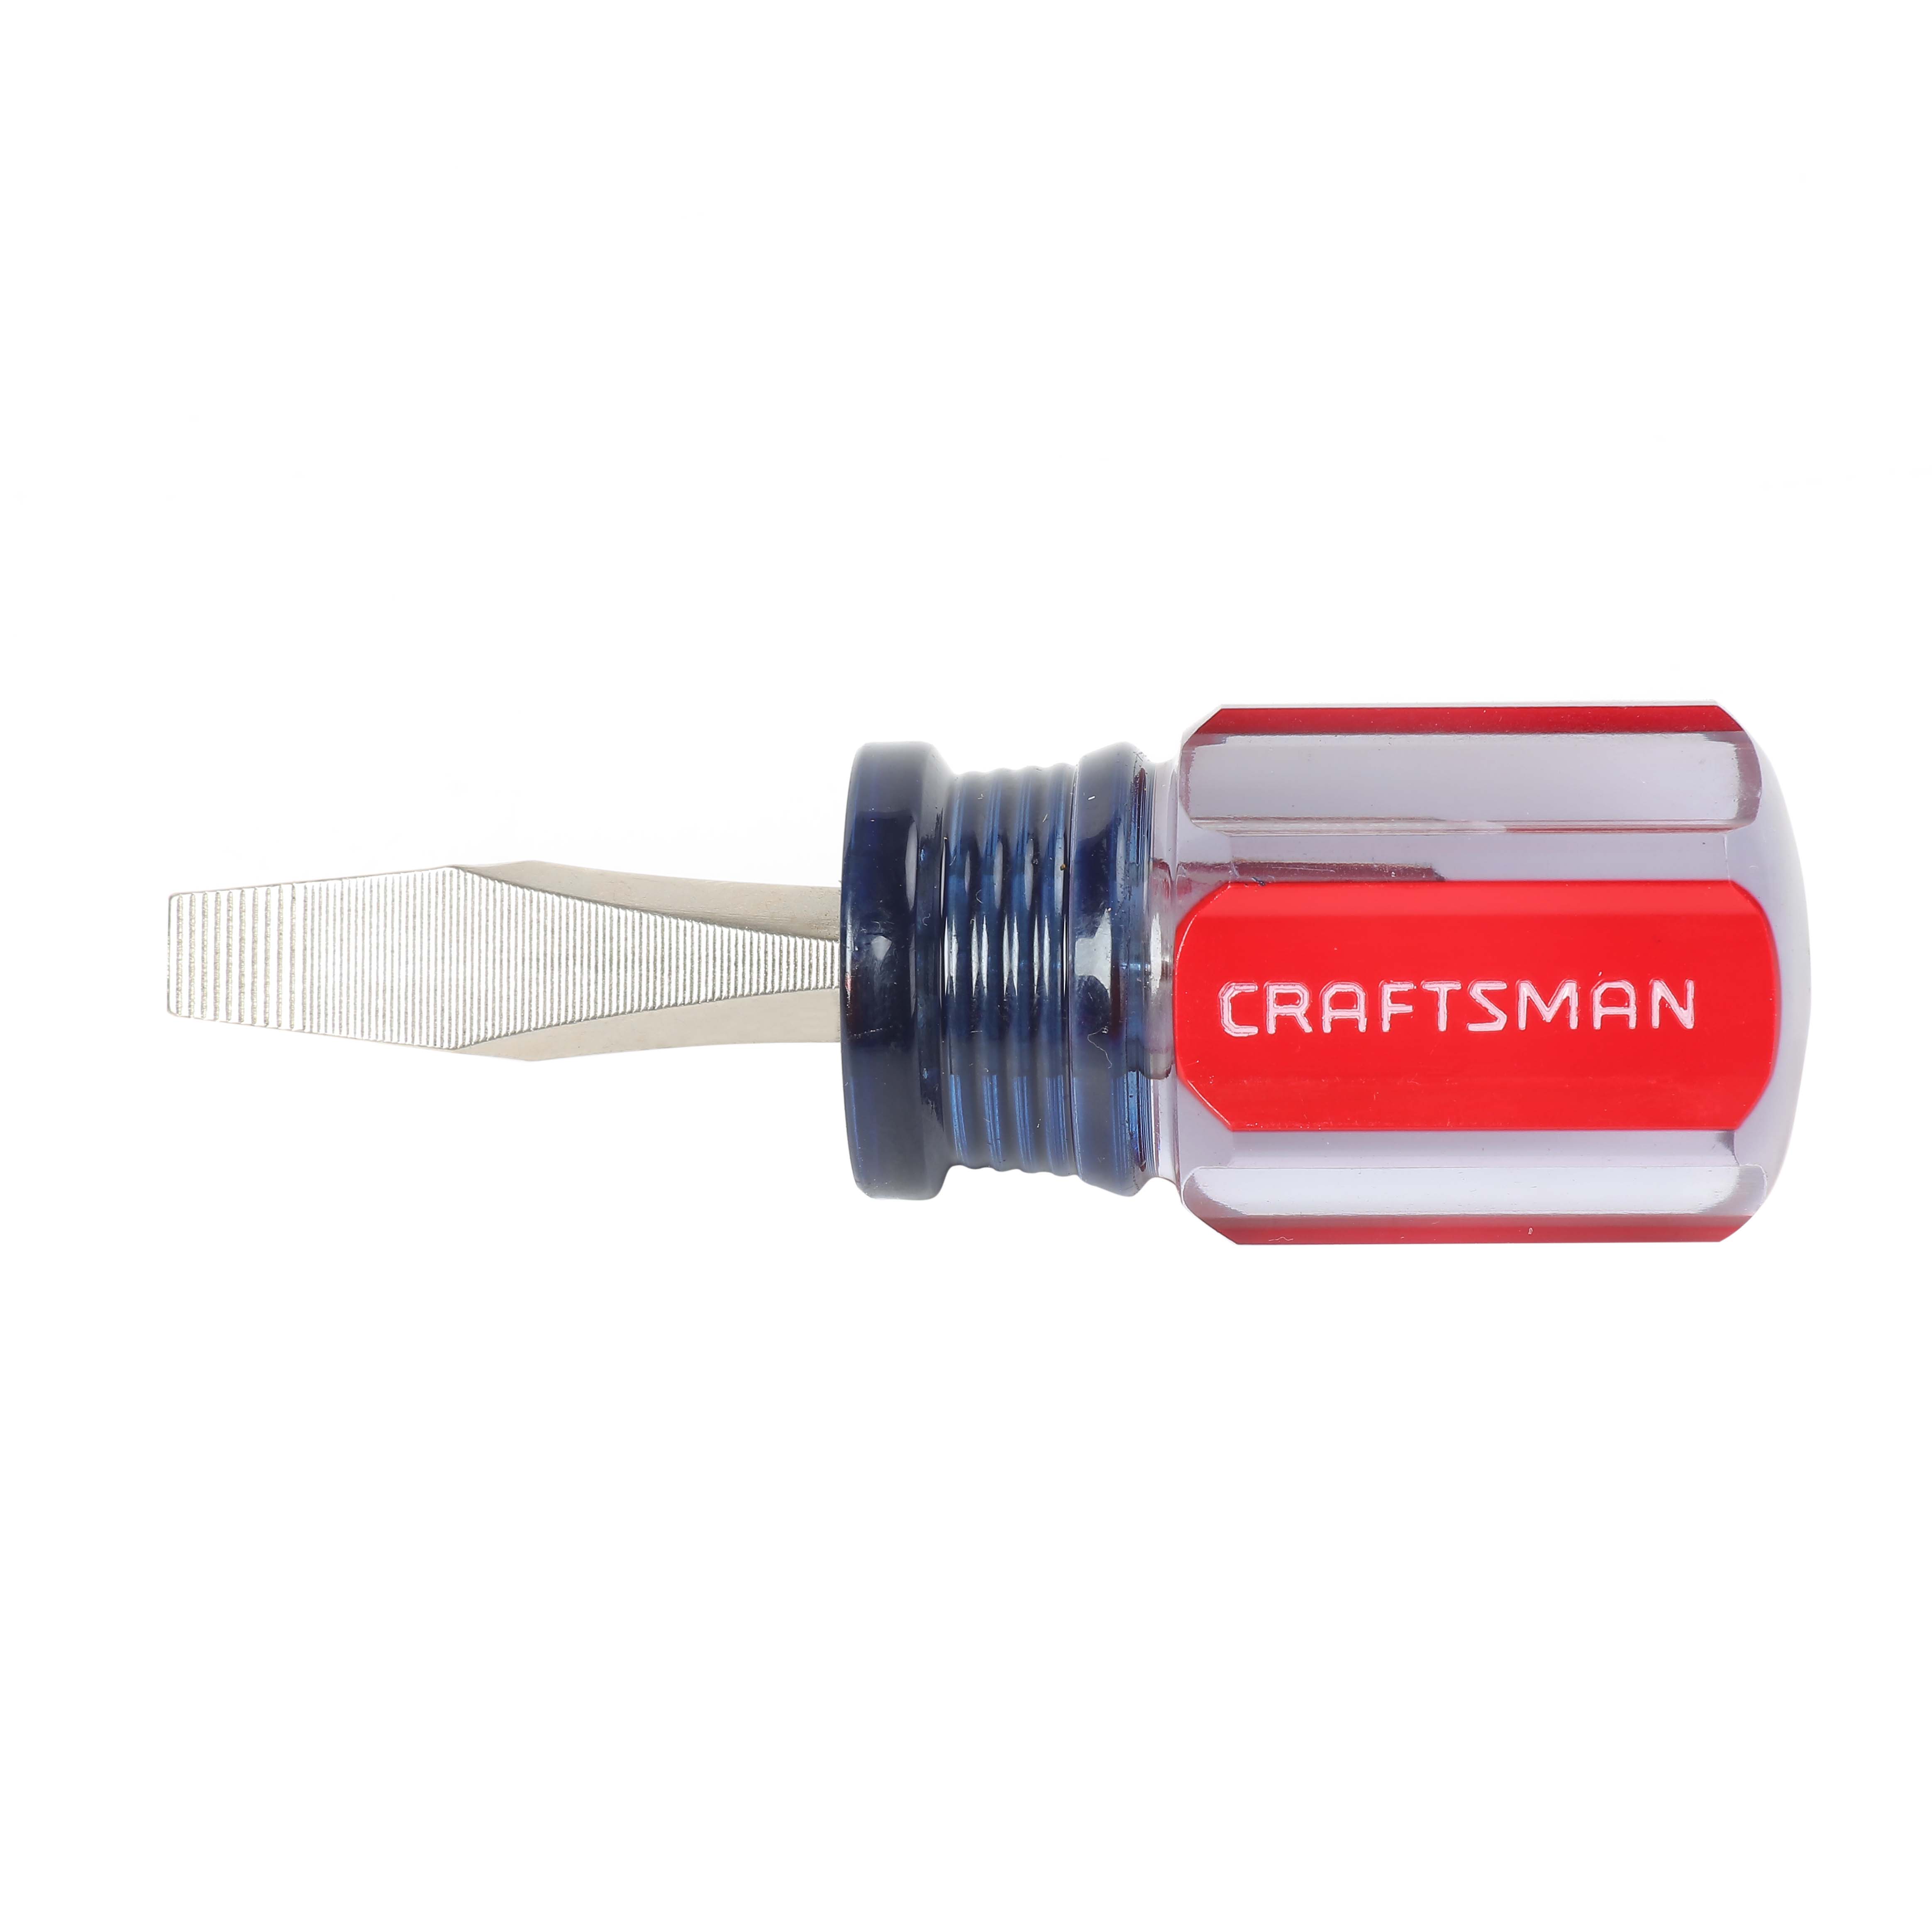 Craftsman Slotted 1/4 X 1-1/2 in Screwdriver